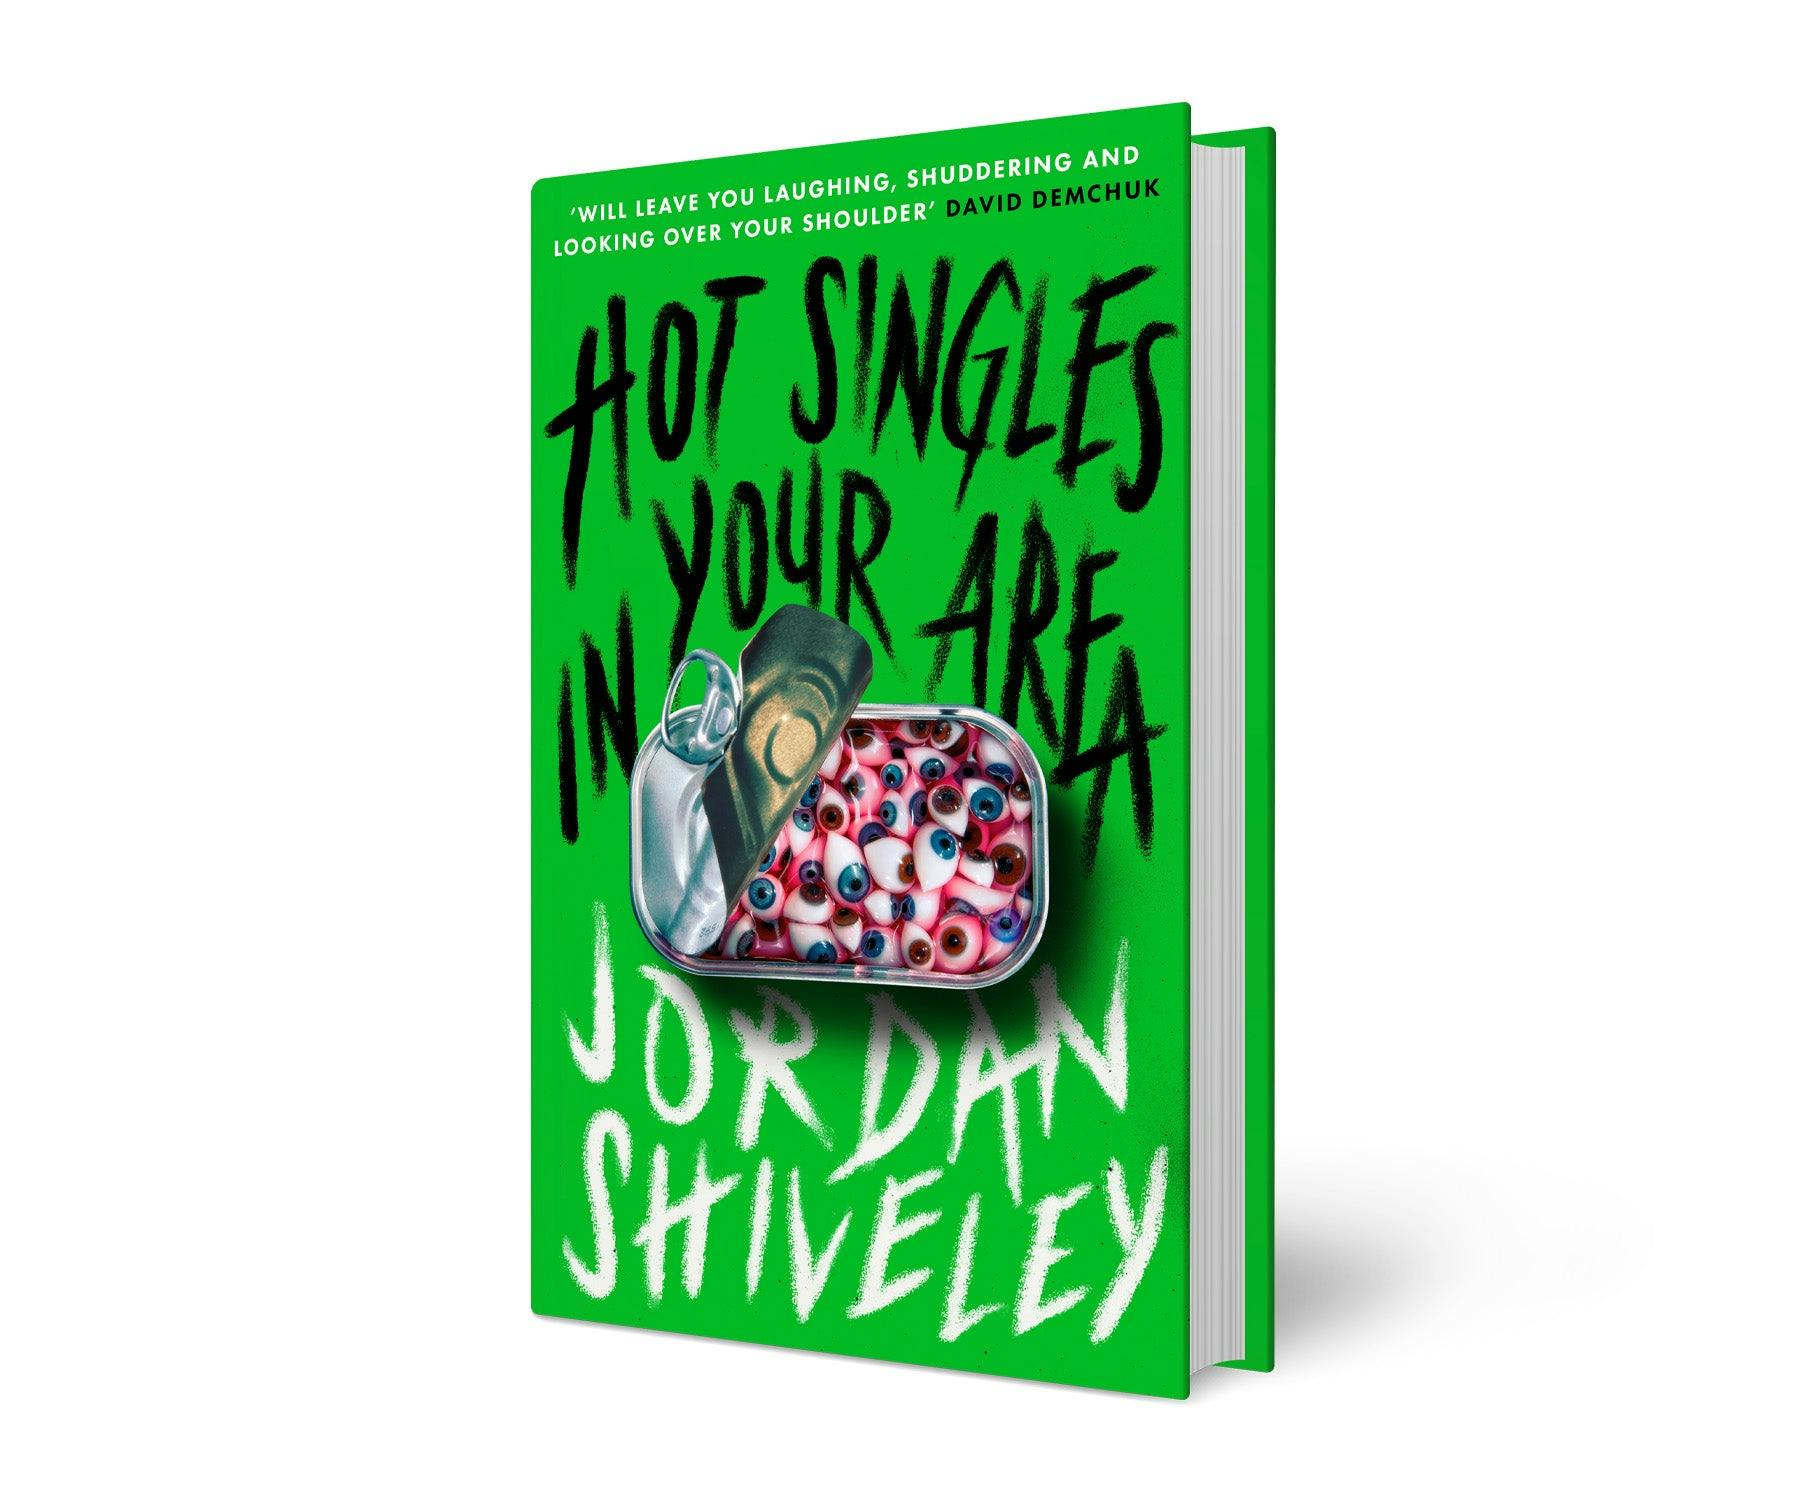 Hot Singles in Your Area by Jordan Shiveley